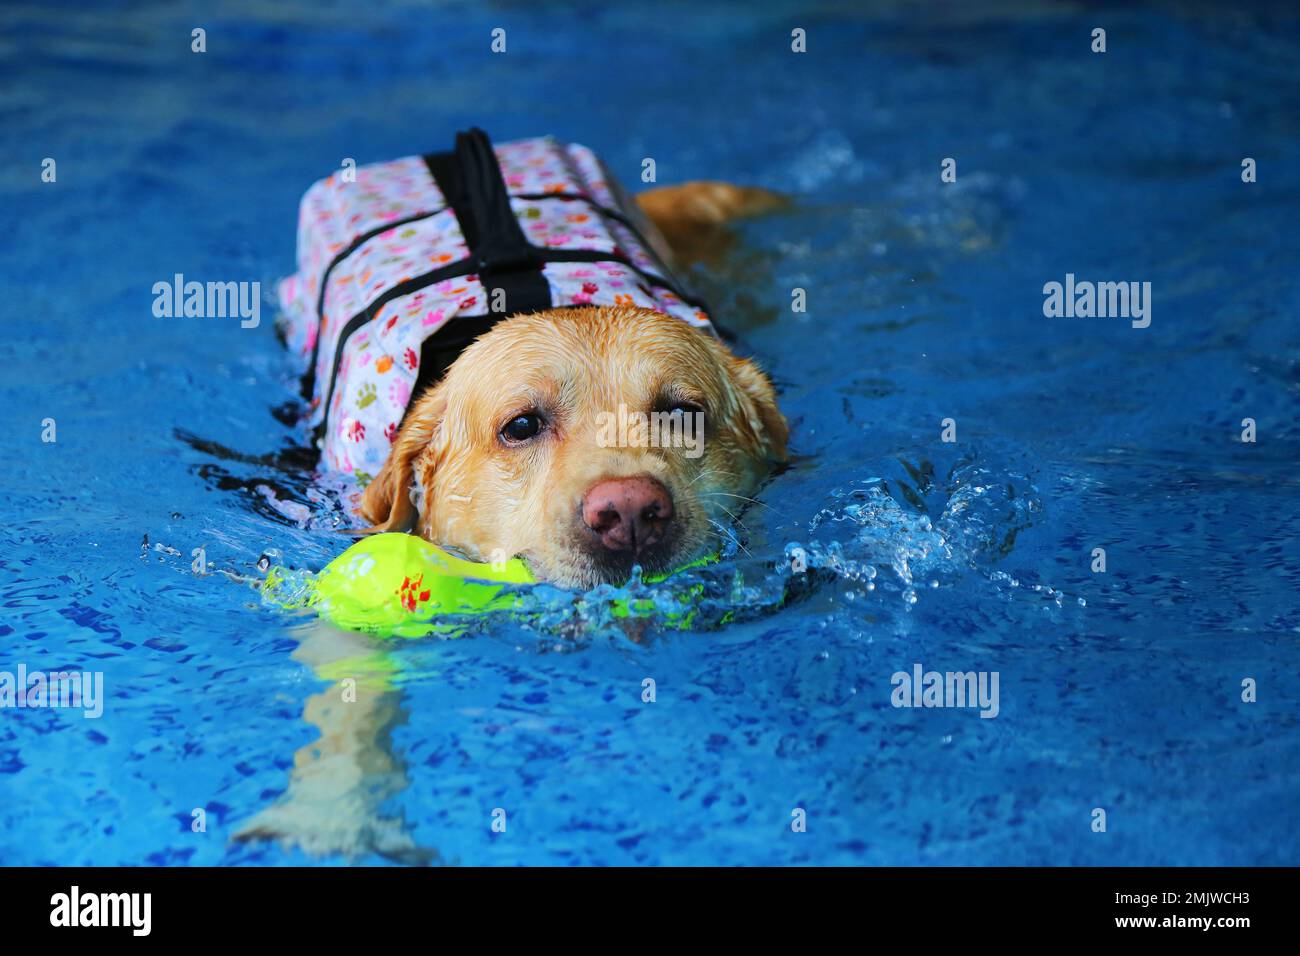 Labrador Retriever  wearing life jacket and holding toy in mouth at the pool. Dog swimming. Stock Photo